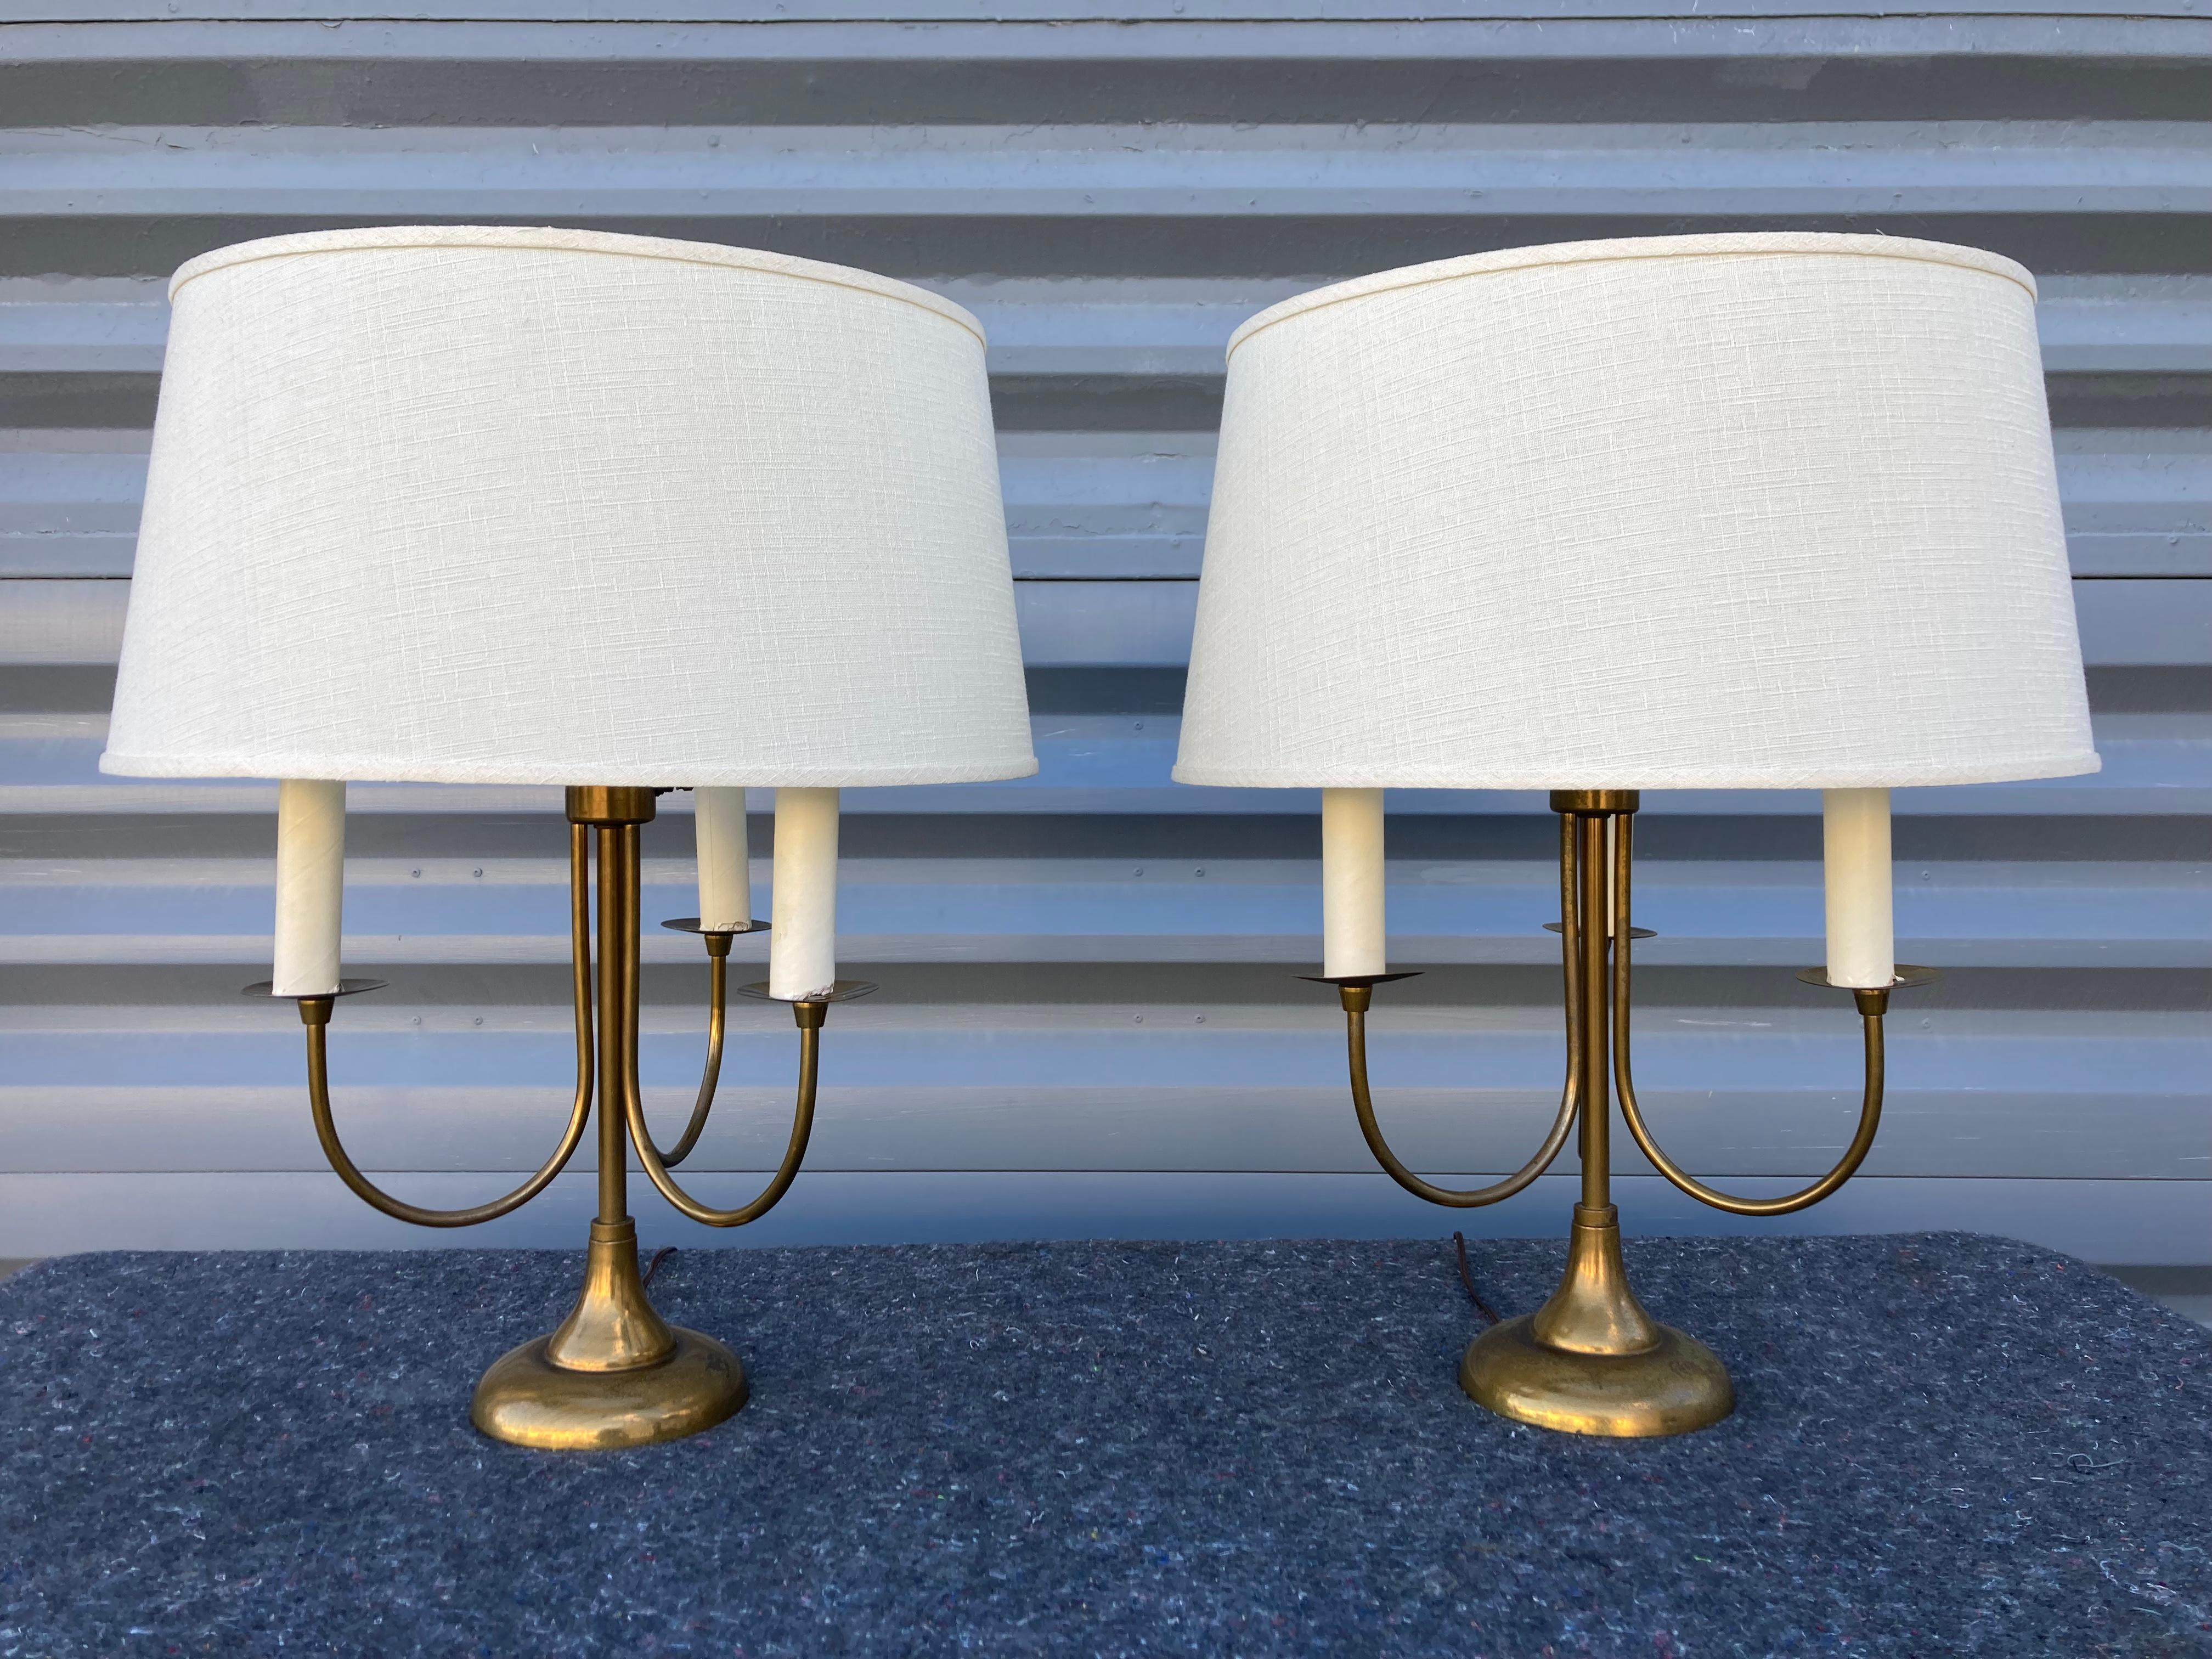 Pair of Mid-Century Modern Table Lamps, Brass, USA, 1950s For Sale 3